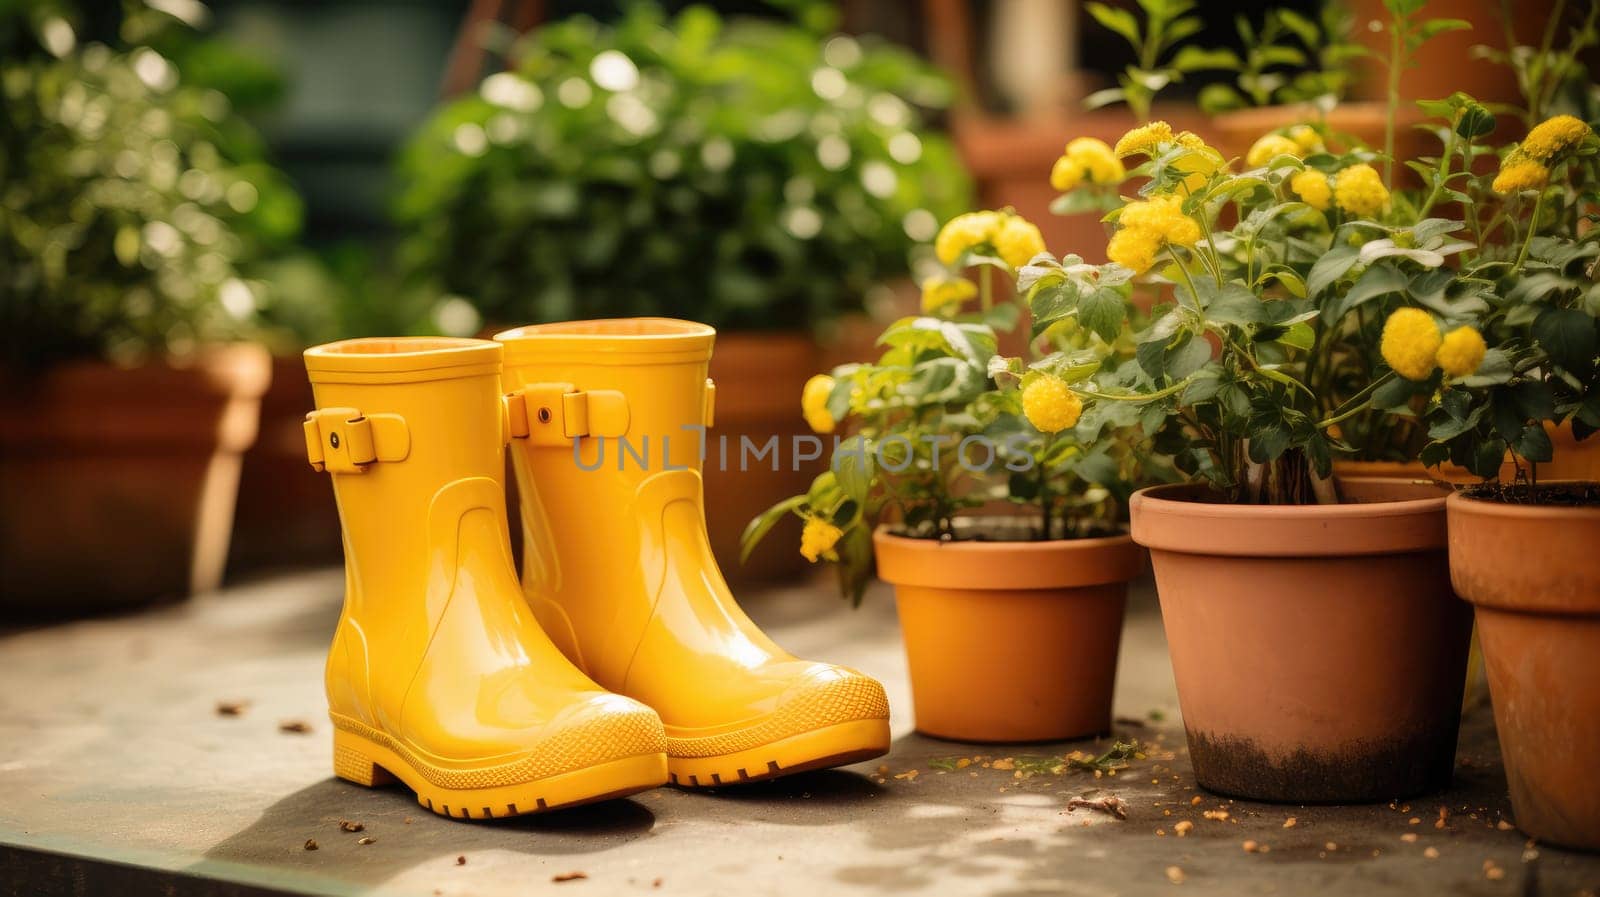 Gardening background with flowerpots, yellow boots in a sunny spring or summer garden